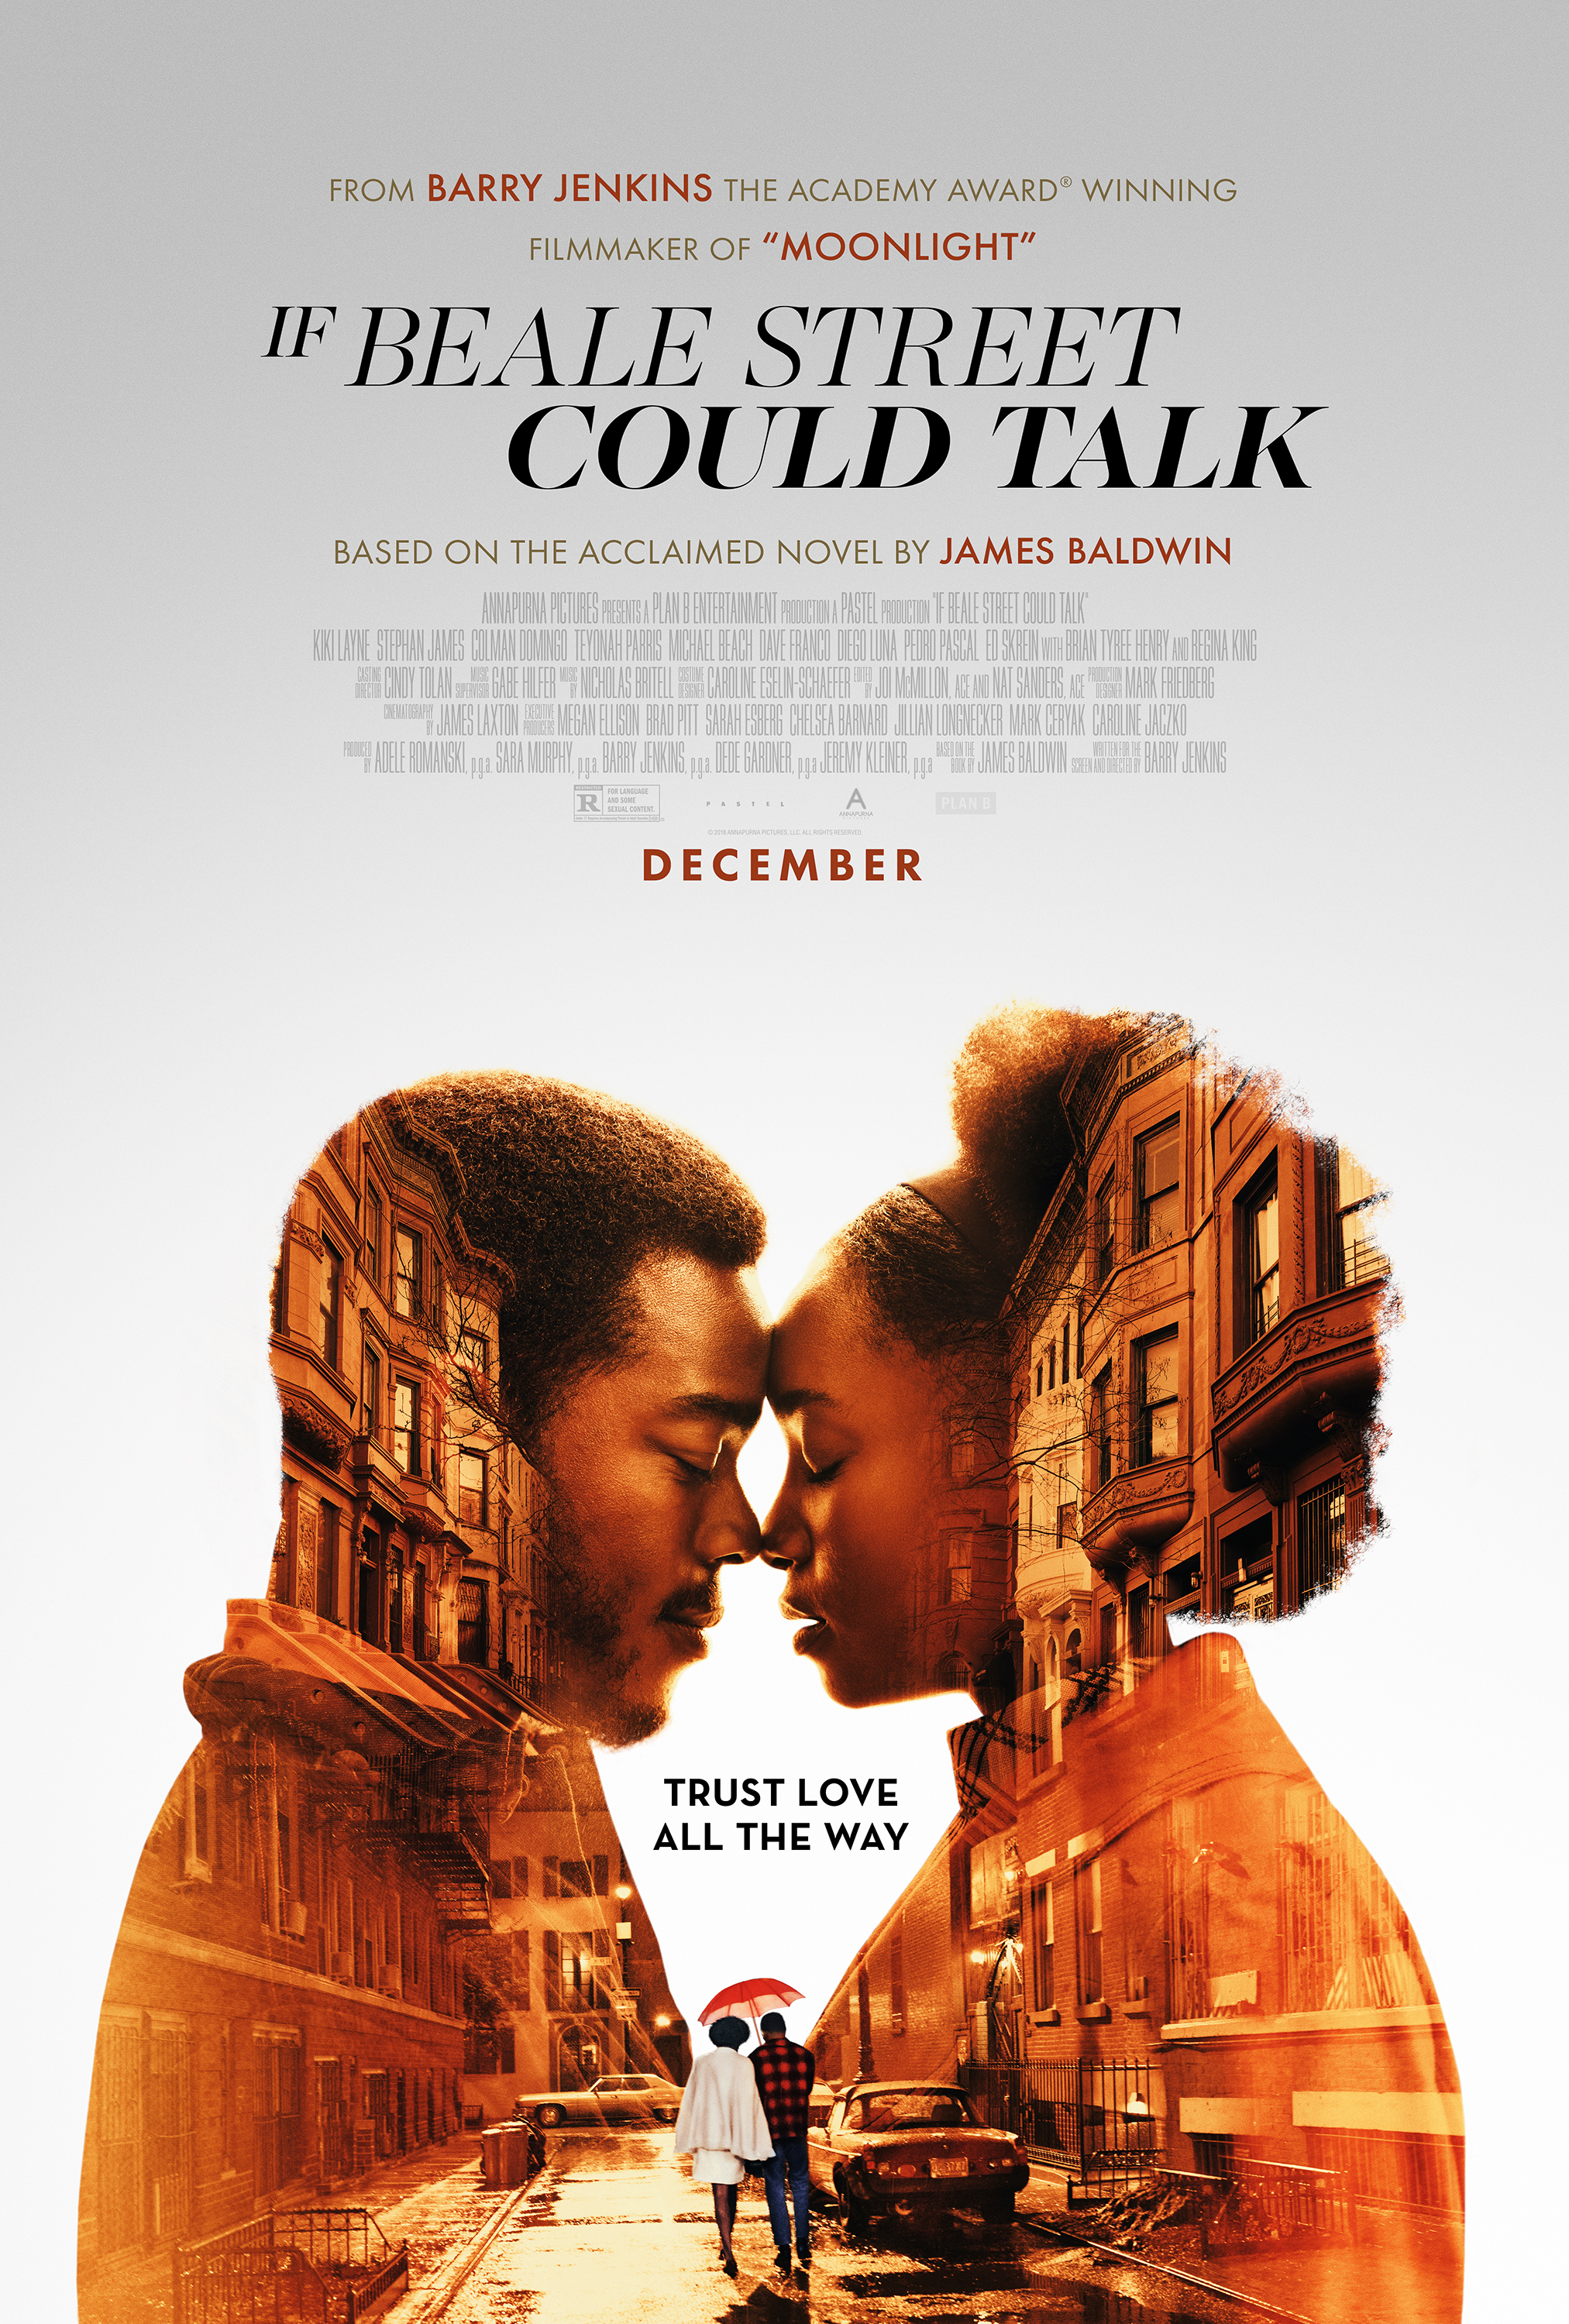 If Beale Street Could Talk | ShotOnWhat?